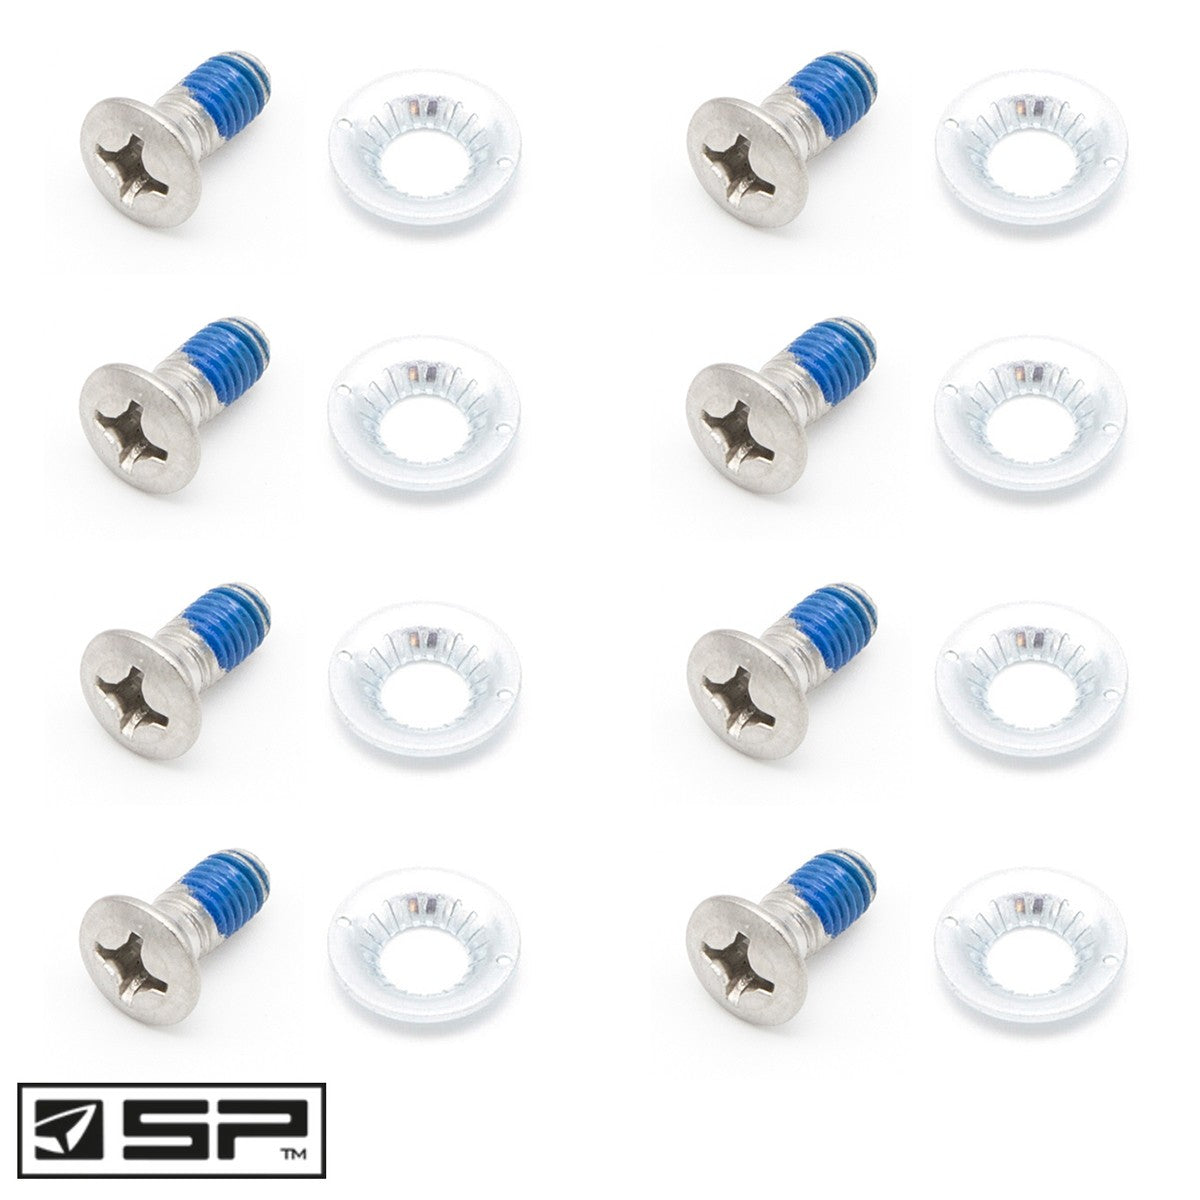 SP - Mounting Pack - 8x 14MM Screws / Washers for Snowboard Mounting